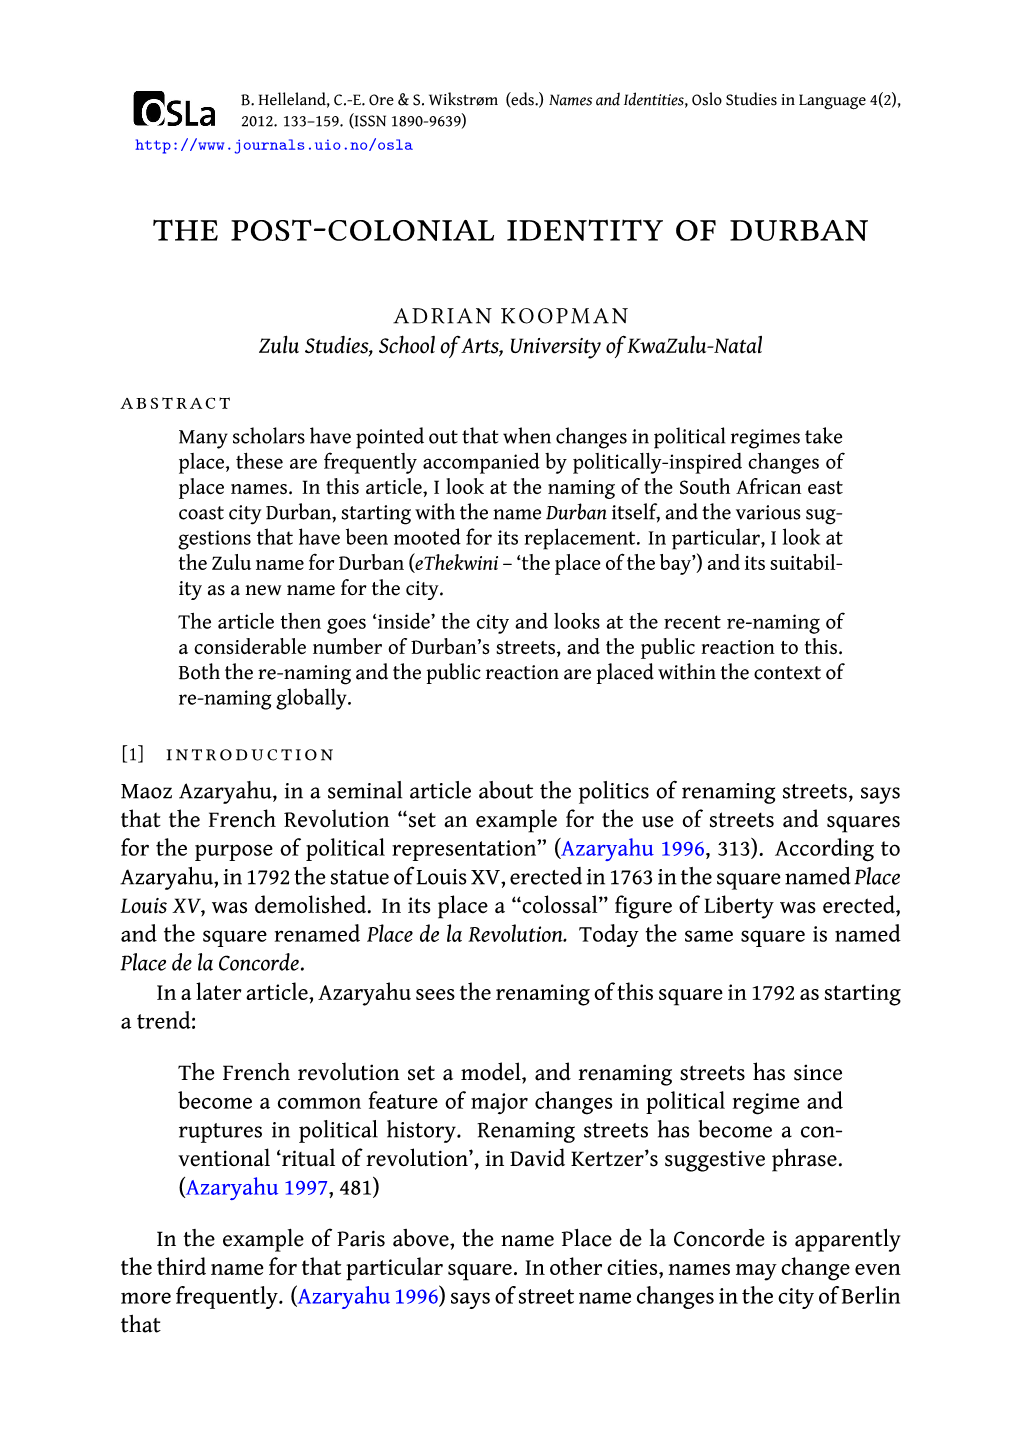 The Post-Colonial Identity of Durban